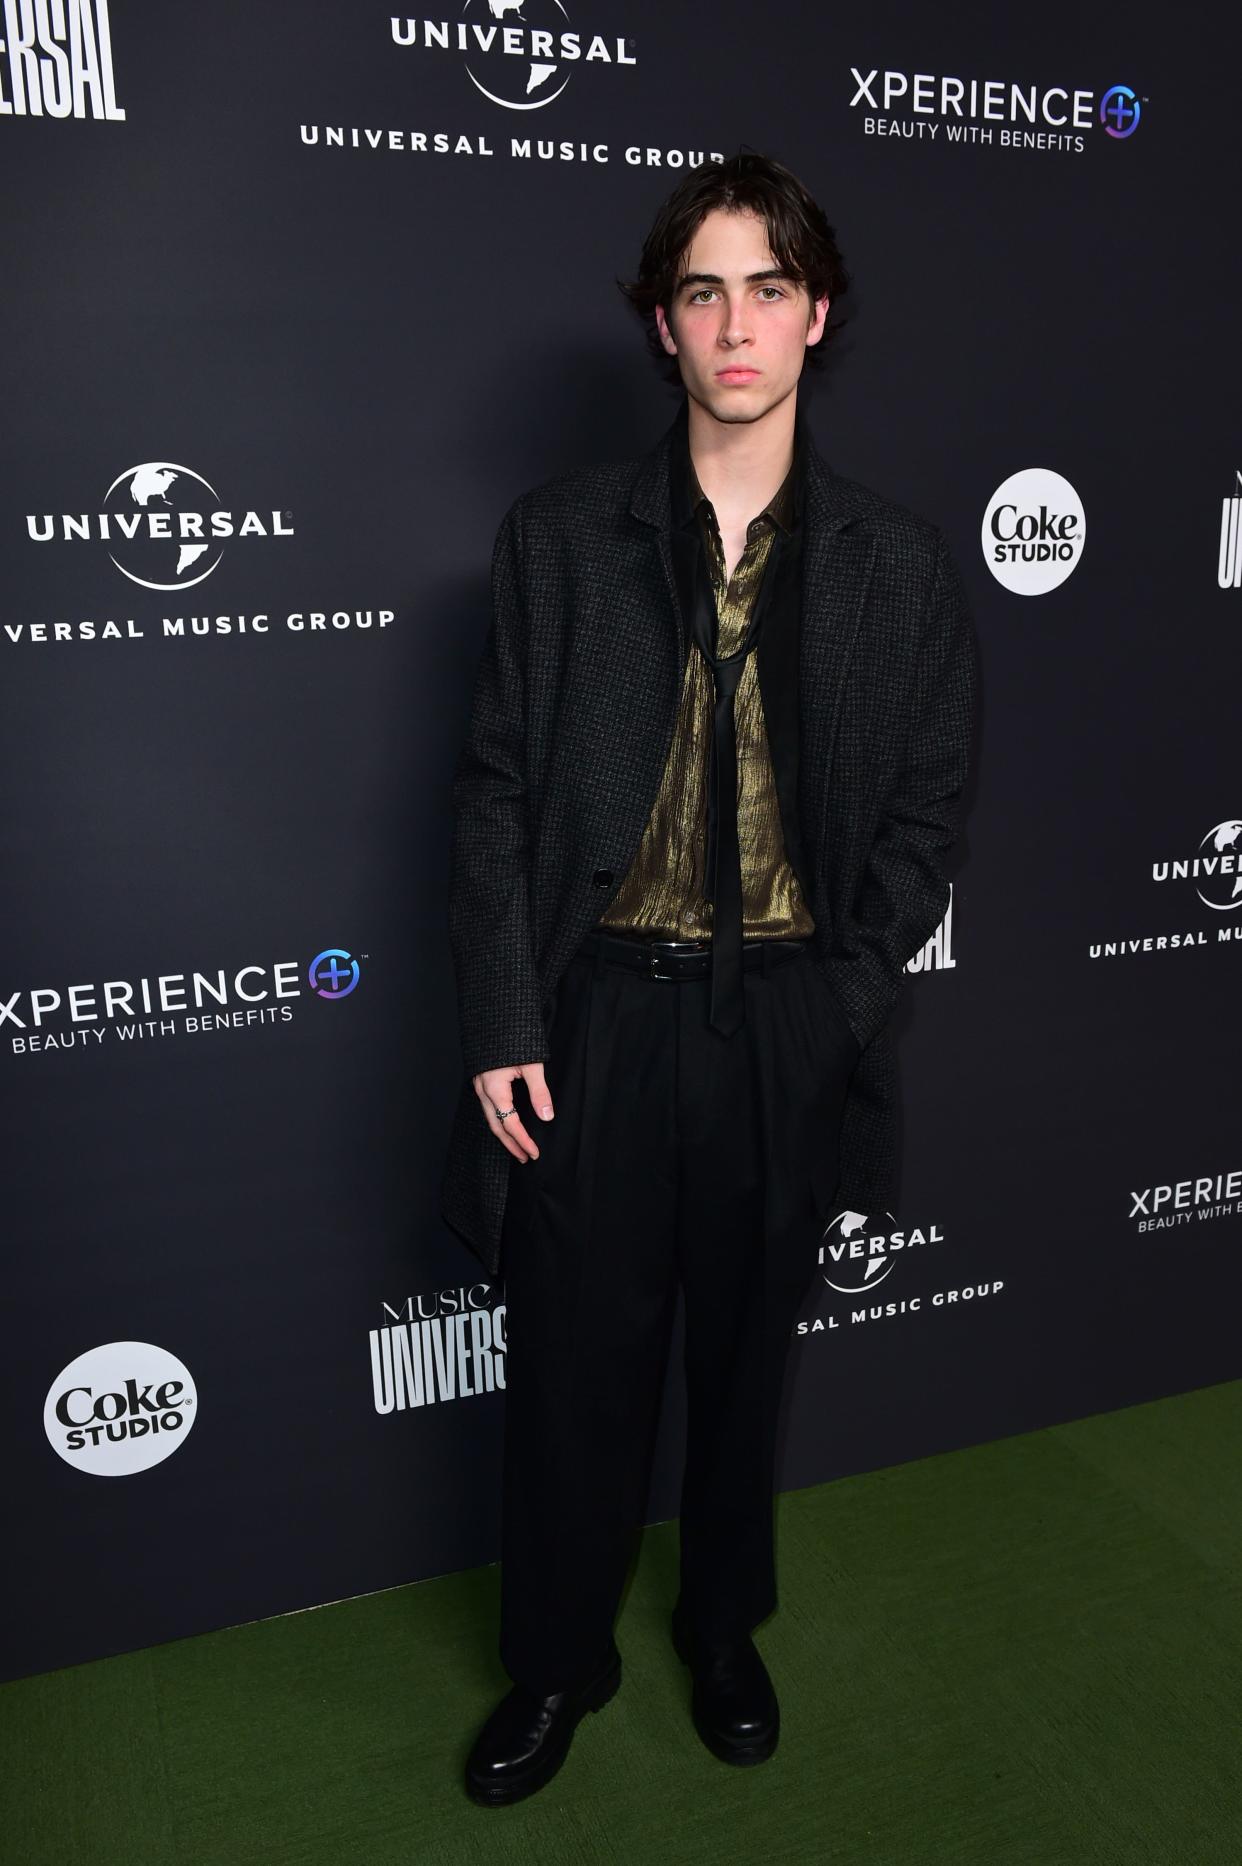 LOS ANGELES, CALIFORNIA - FEBRUARY 05: Aidan Bissett attends Universal Music Group’s 2023 After Party to celebrate the 65th Grammy Awards, Presented by Coke Studio and Merz Aesthetics’ Xperience+ at Milk Studios Los Angeles on February 05, 2023 in Los Angeles, California. (Photo by Vivien Killilea/Getty Images for Universal Music Group for Brands) ORG XMIT: 775921605 ORIG FILE ID: 1463367298